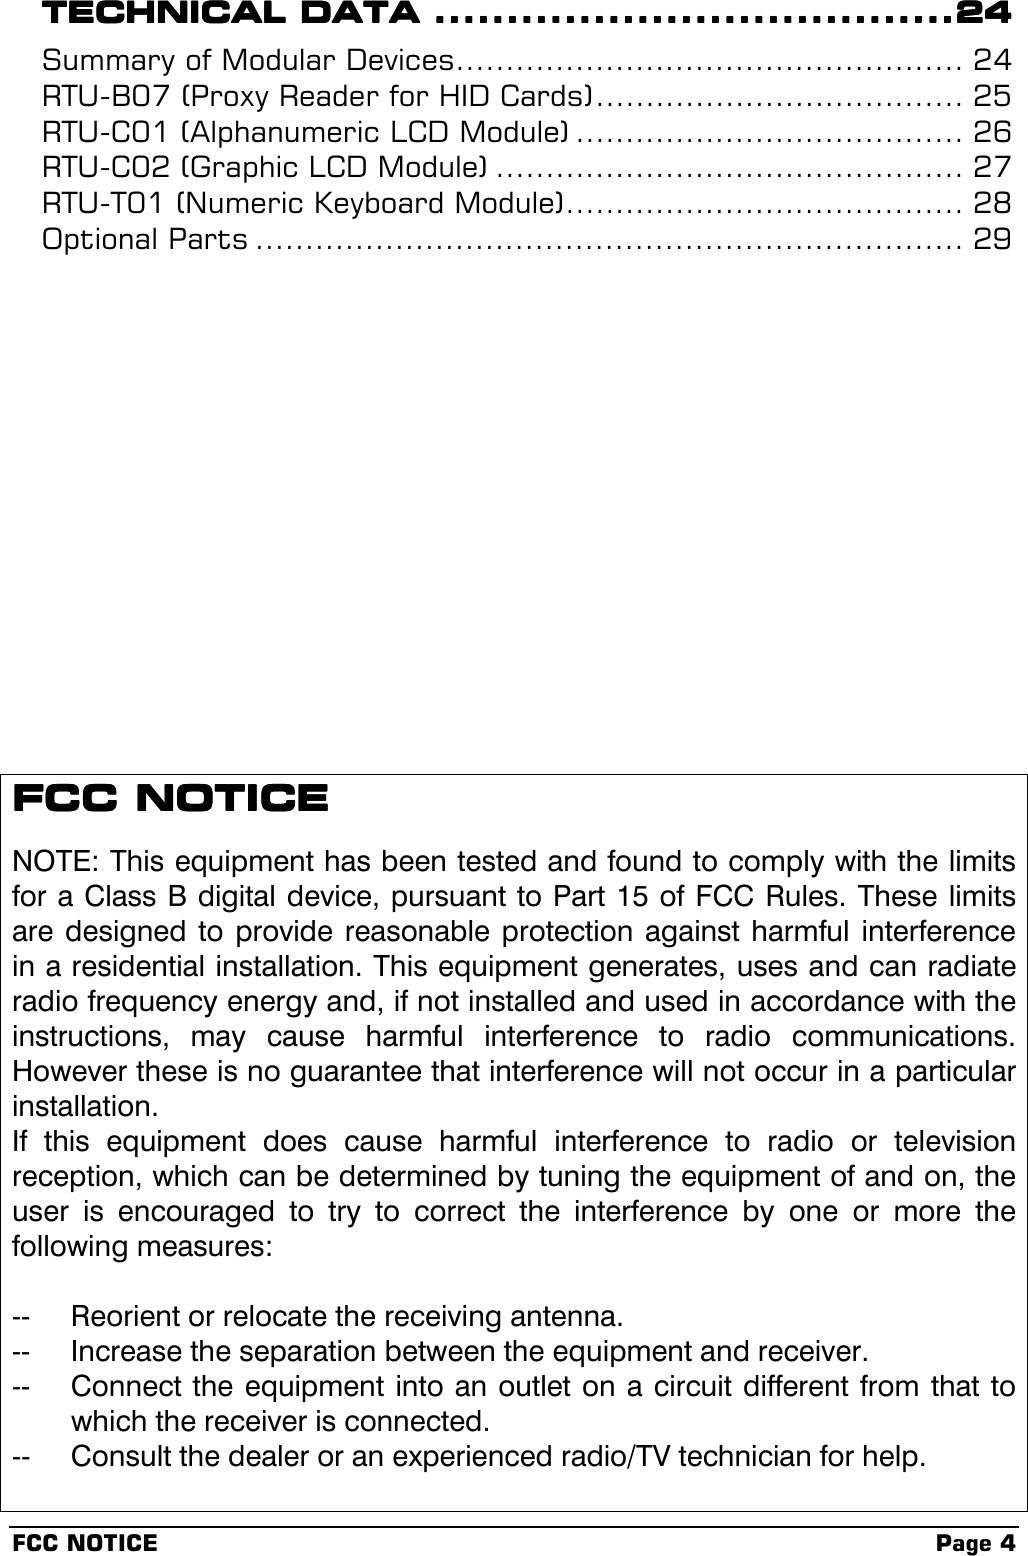 FCC NOTICE Page 4TECHNICAL DATATECHNICAL DATATECHNICAL DATATECHNICAL DATA ................................................................................................................................................24242424Summary of Modular Devices................................................... 24RTU-B07 (Proxy Reader for HID Cards)..................................... 25RTU-C01 (Alphanumeric LCD Module) ....................................... 26RTU-C02 (Graphic LCD Module) ............................................... 27RTU-T01 (Numeric Keyboard Module)........................................ 28Optional Parts ....................................................................... 29FCC NOTICEFCC NOTICEFCC NOTICEFCC NOTICENOTE: This equipment has been tested and found to comply with the limitsfor a Class B digital device, pursuant to Part 15 of FCC Rules. These limitsare designed to provide reasonable protection against harmful interferencein a residential installation. This equipment generates, uses and can radiateradio frequency energy and, if not installed and used in accordance with theinstructions, may cause harmful interference to radio communications.However these is no guarantee that interference will not occur in a particularinstallation.If this equipment does cause harmful interference to radio or televisionreception, which can be determined by tuning the equipment of and on, theuser is encouraged to try to correct the interference by one or more thefollowing measures:-- Reorient or relocate the receiving antenna.-- Increase the separation between the equipment and receiver.-- Connect the equipment into an outlet on a circuit different from that towhich the receiver is connected.-- Consult the dealer or an experienced radio/TV technician for help.